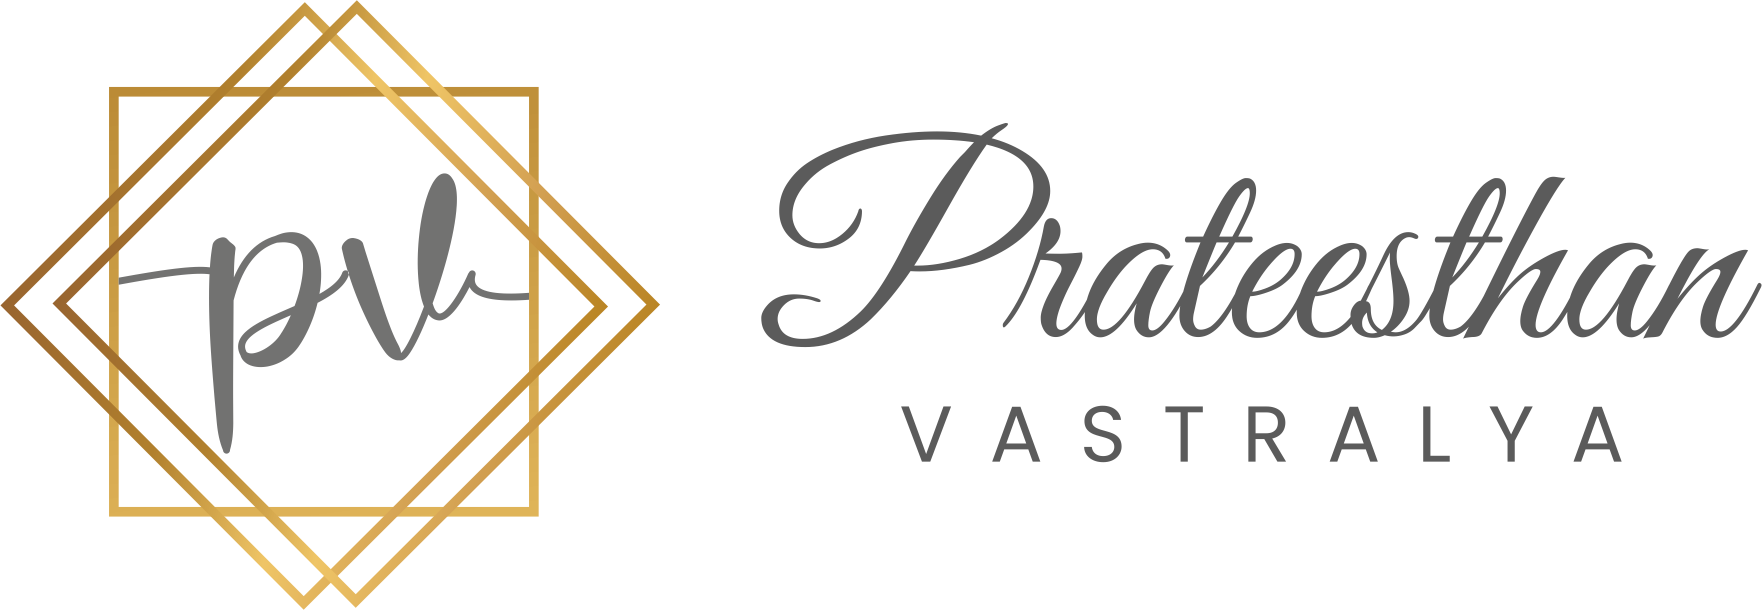 PRATEESTHAN VASTRA PRIVATE LIMITED